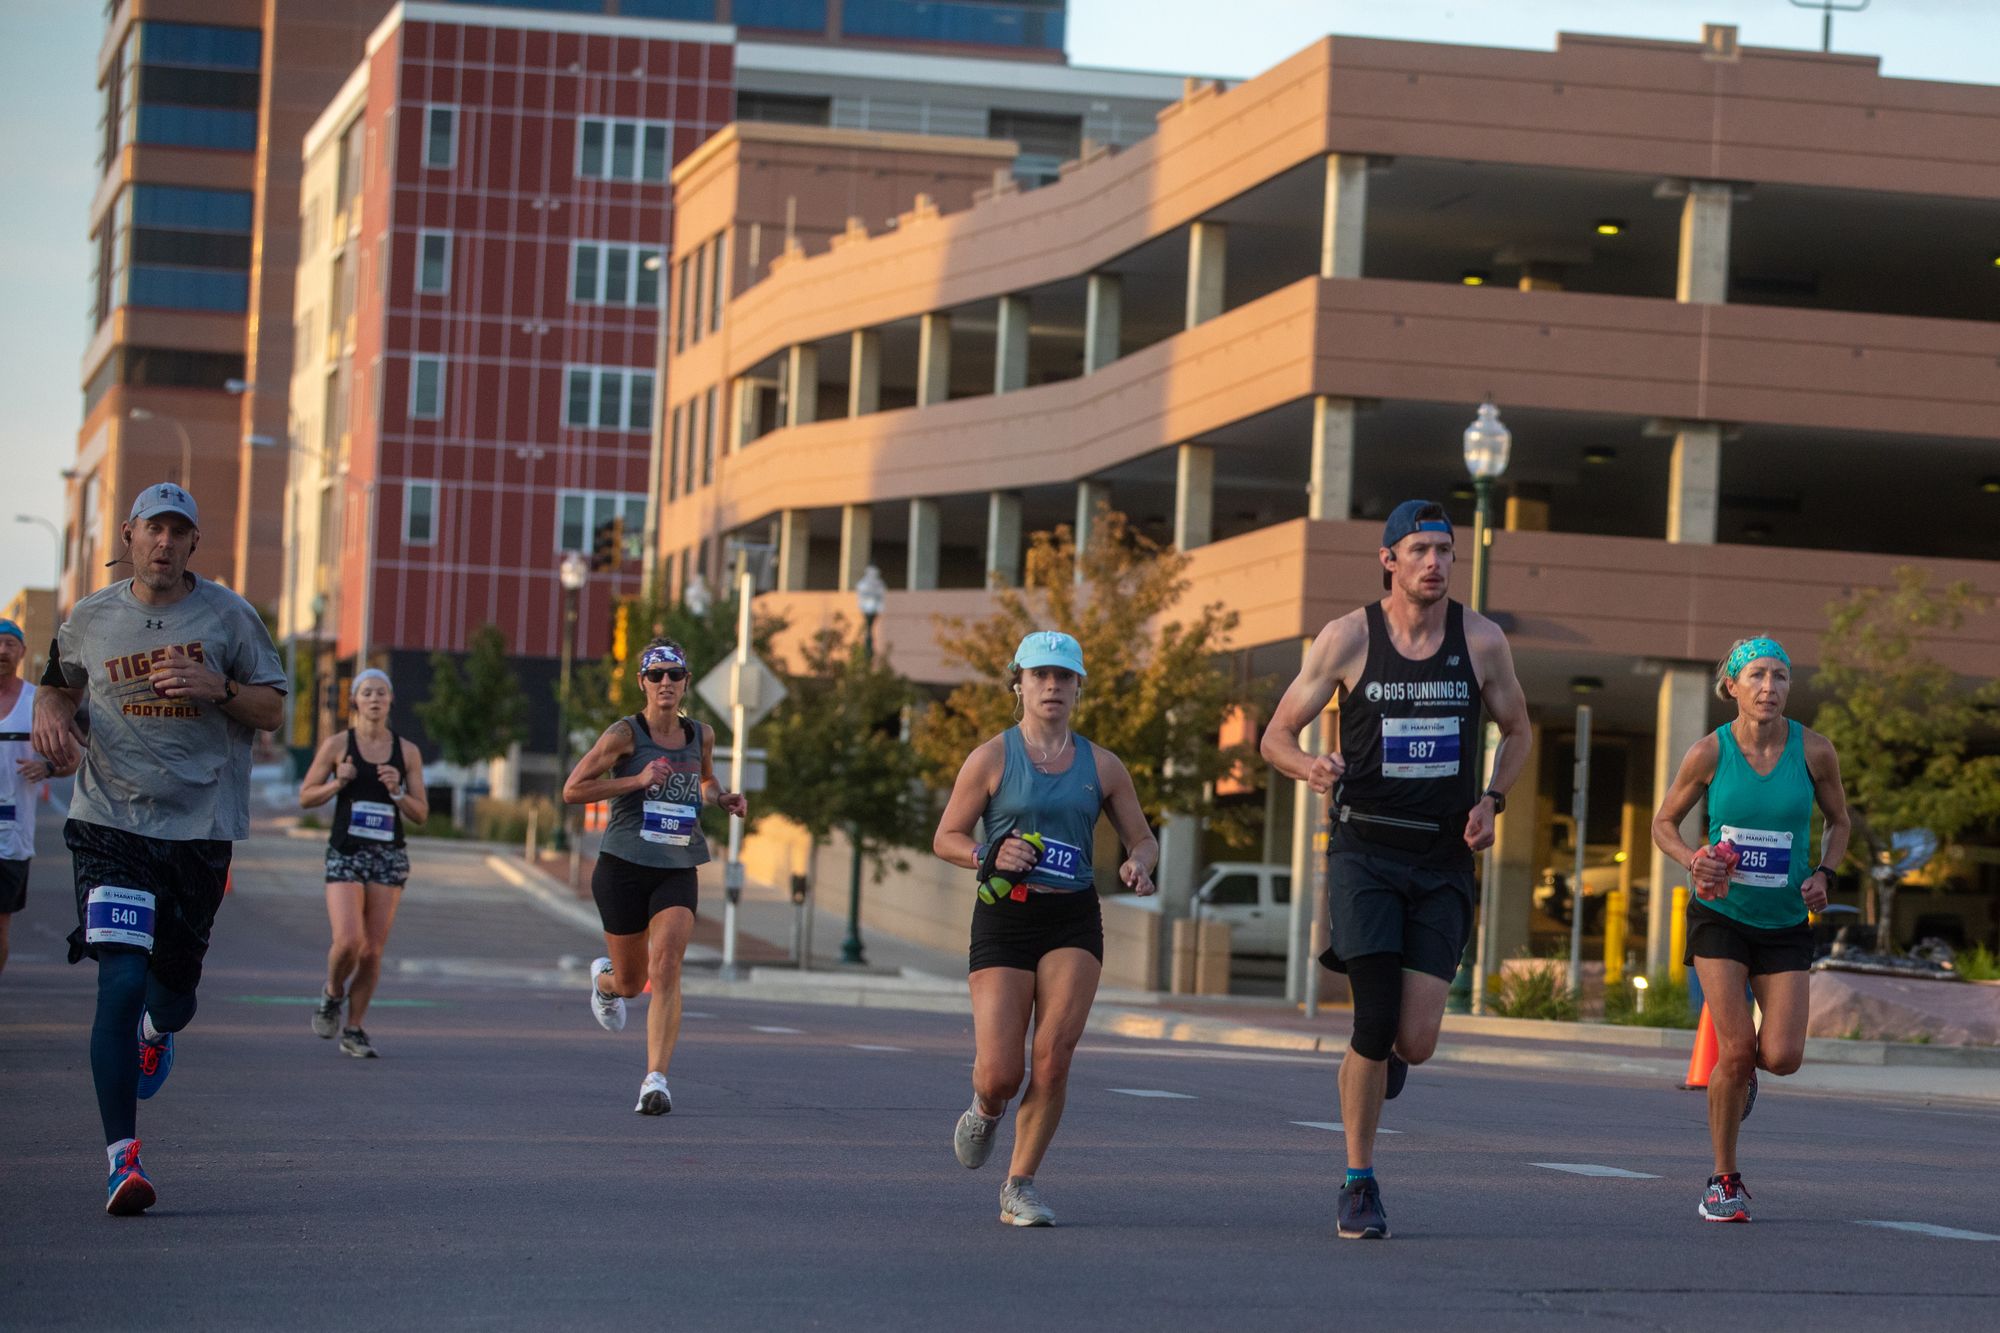 What to know as Sioux Falls hosts first full marathon since 2019